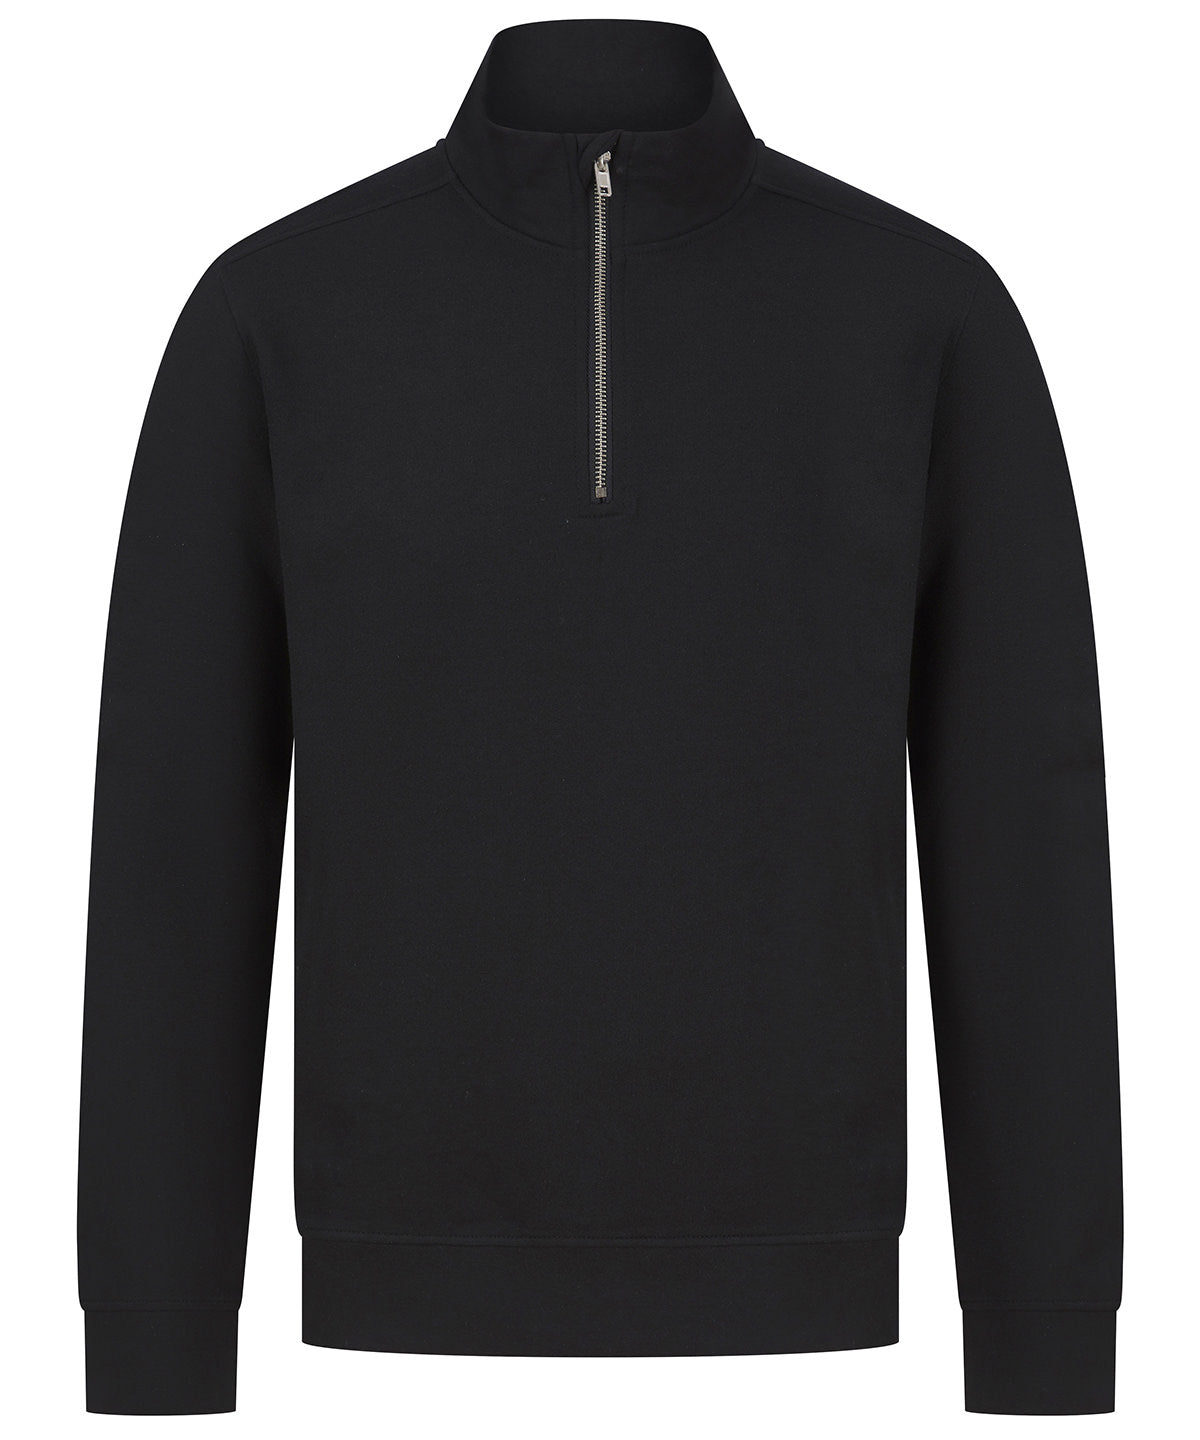 1/4 Zip Recycled Sweatshirt with pockets (Mens/Unisex)